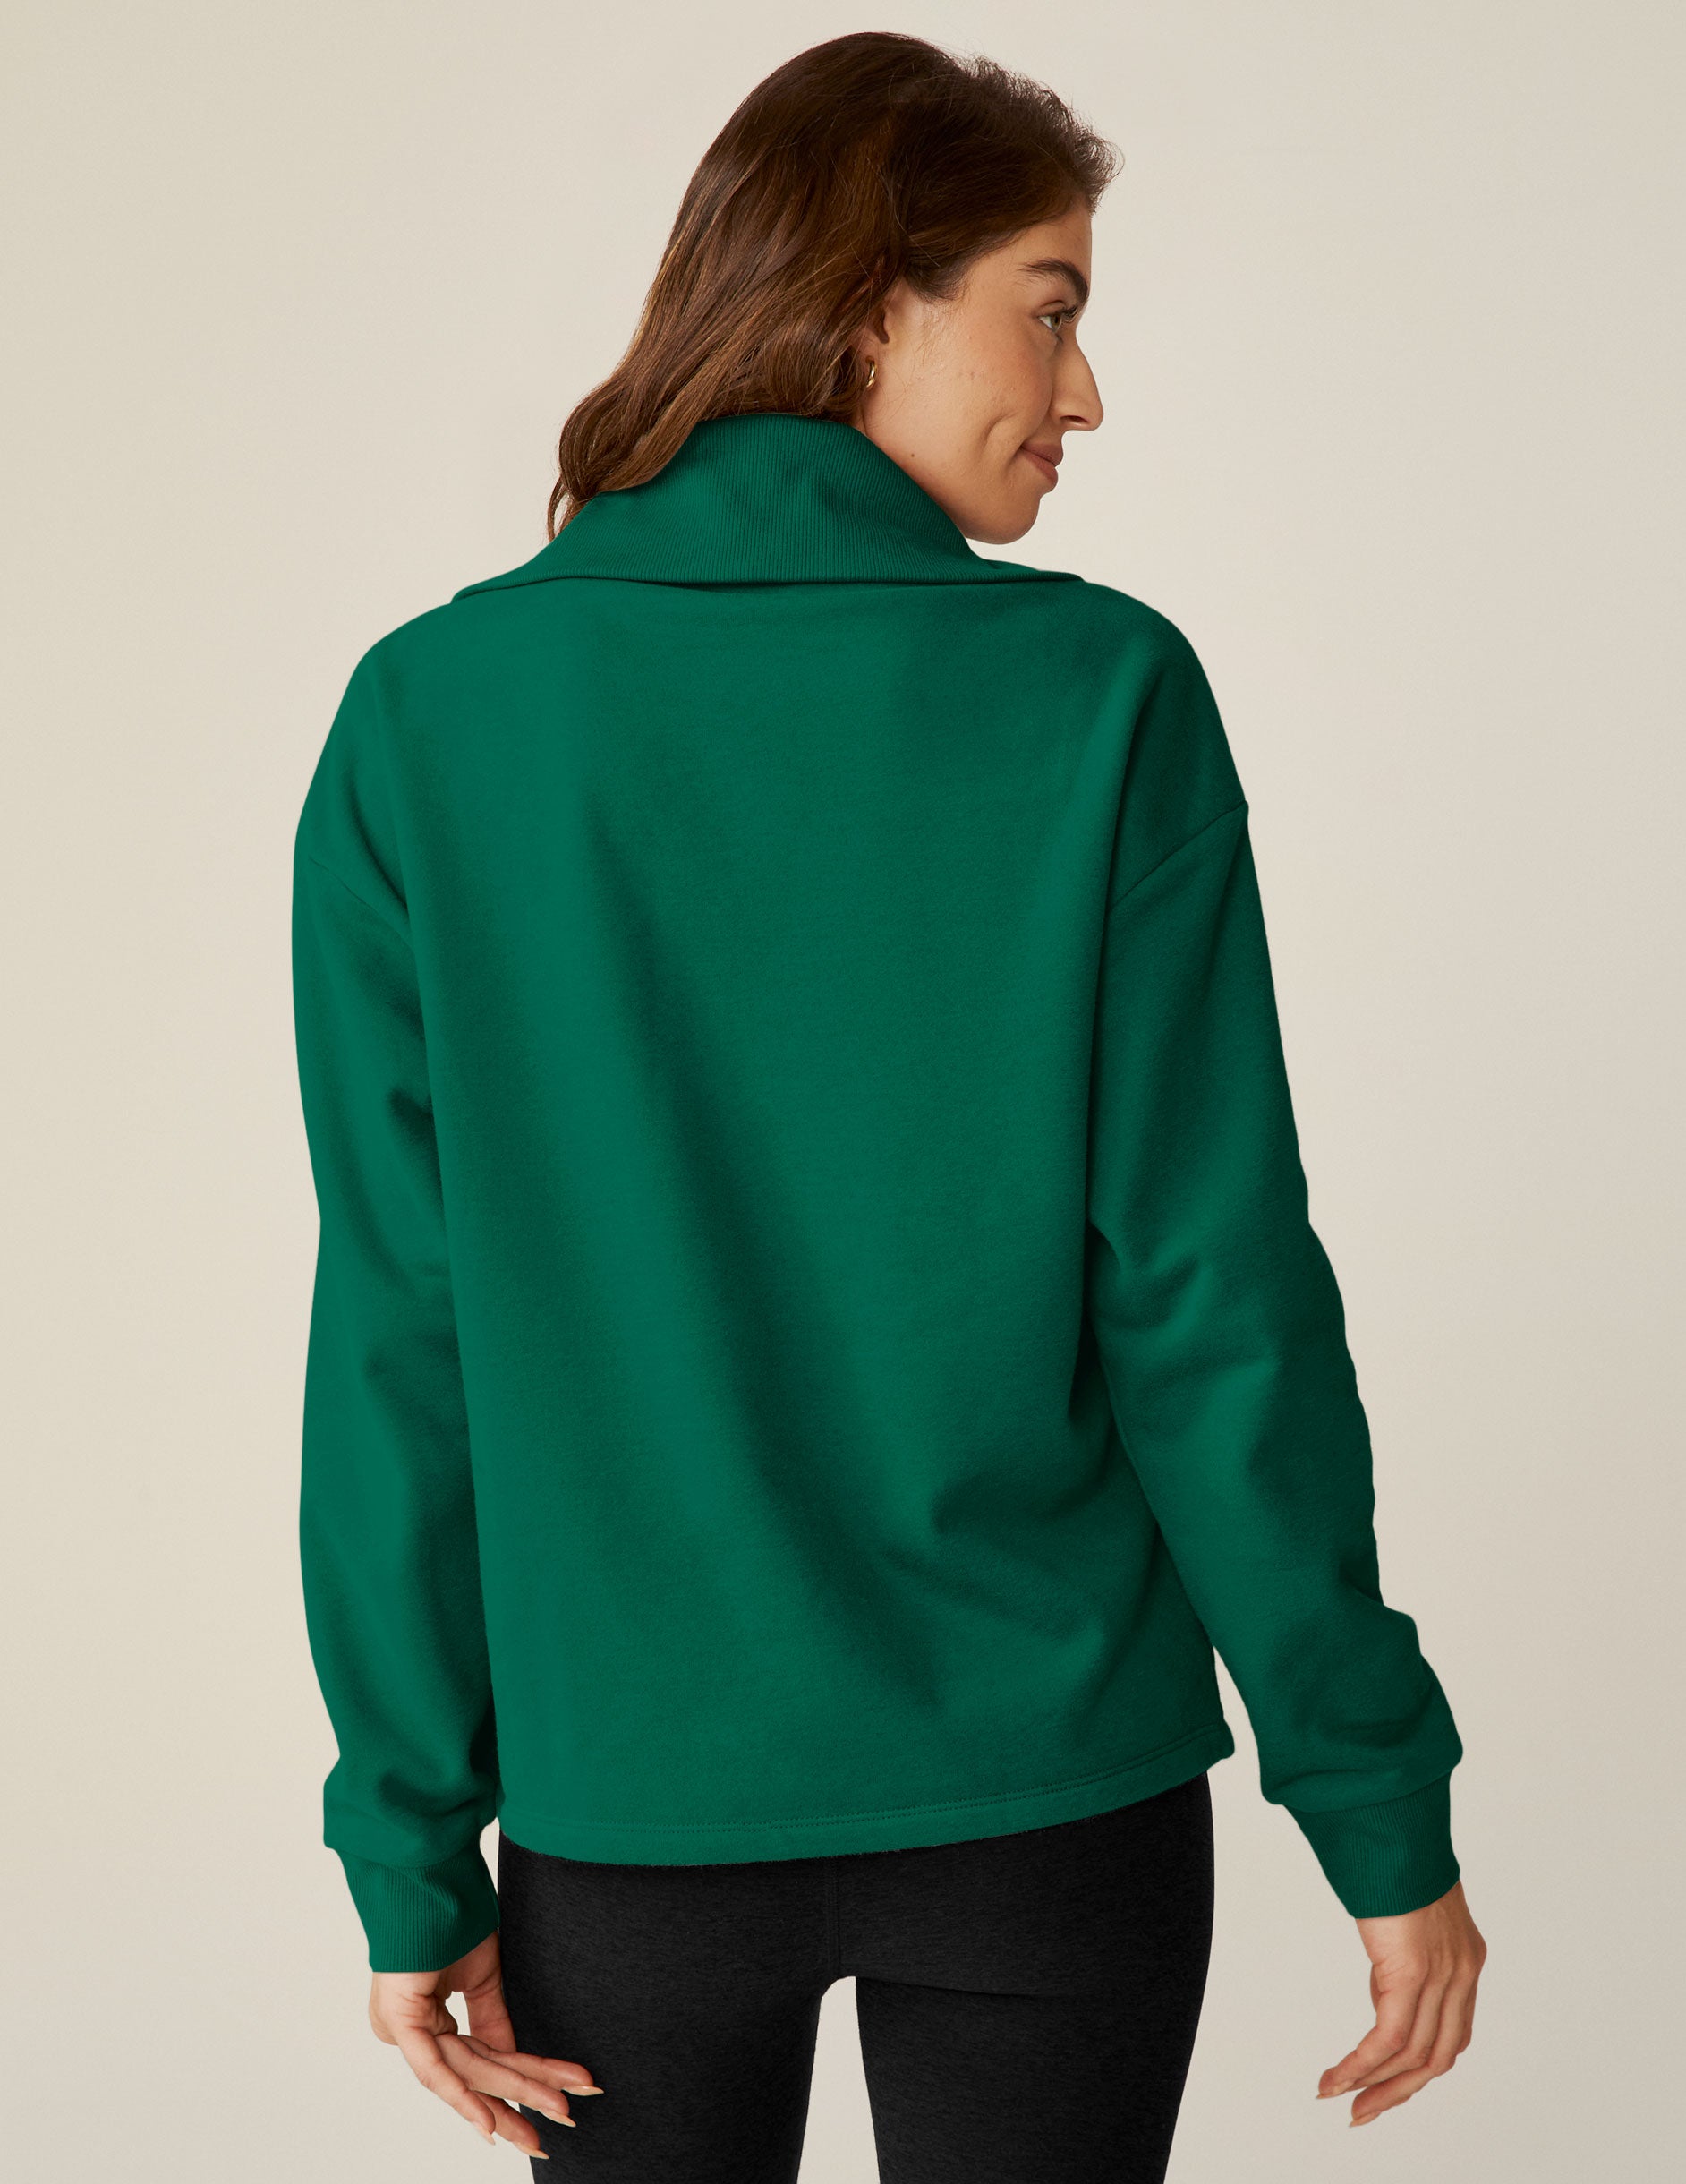 green quarter zip pullover jacket with a kangaroo pouch.